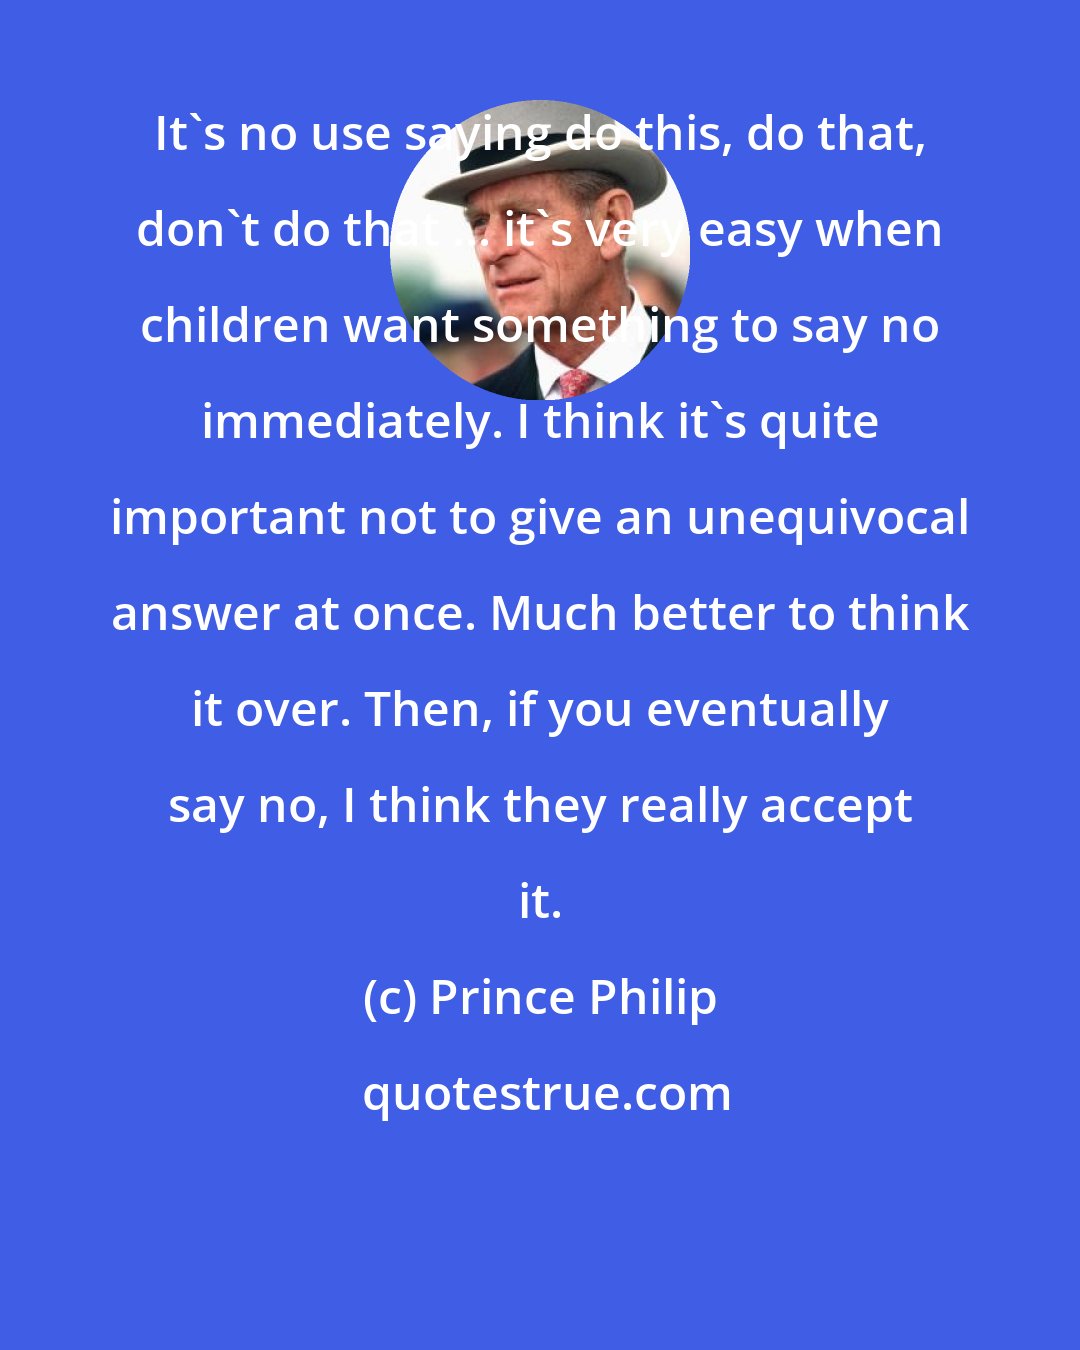 Prince Philip: It's no use saying do this, do that, don't do that ... it's very easy when children want something to say no immediately. I think it's quite important not to give an unequivocal answer at once. Much better to think it over. Then, if you eventually say no, I think they really accept it.